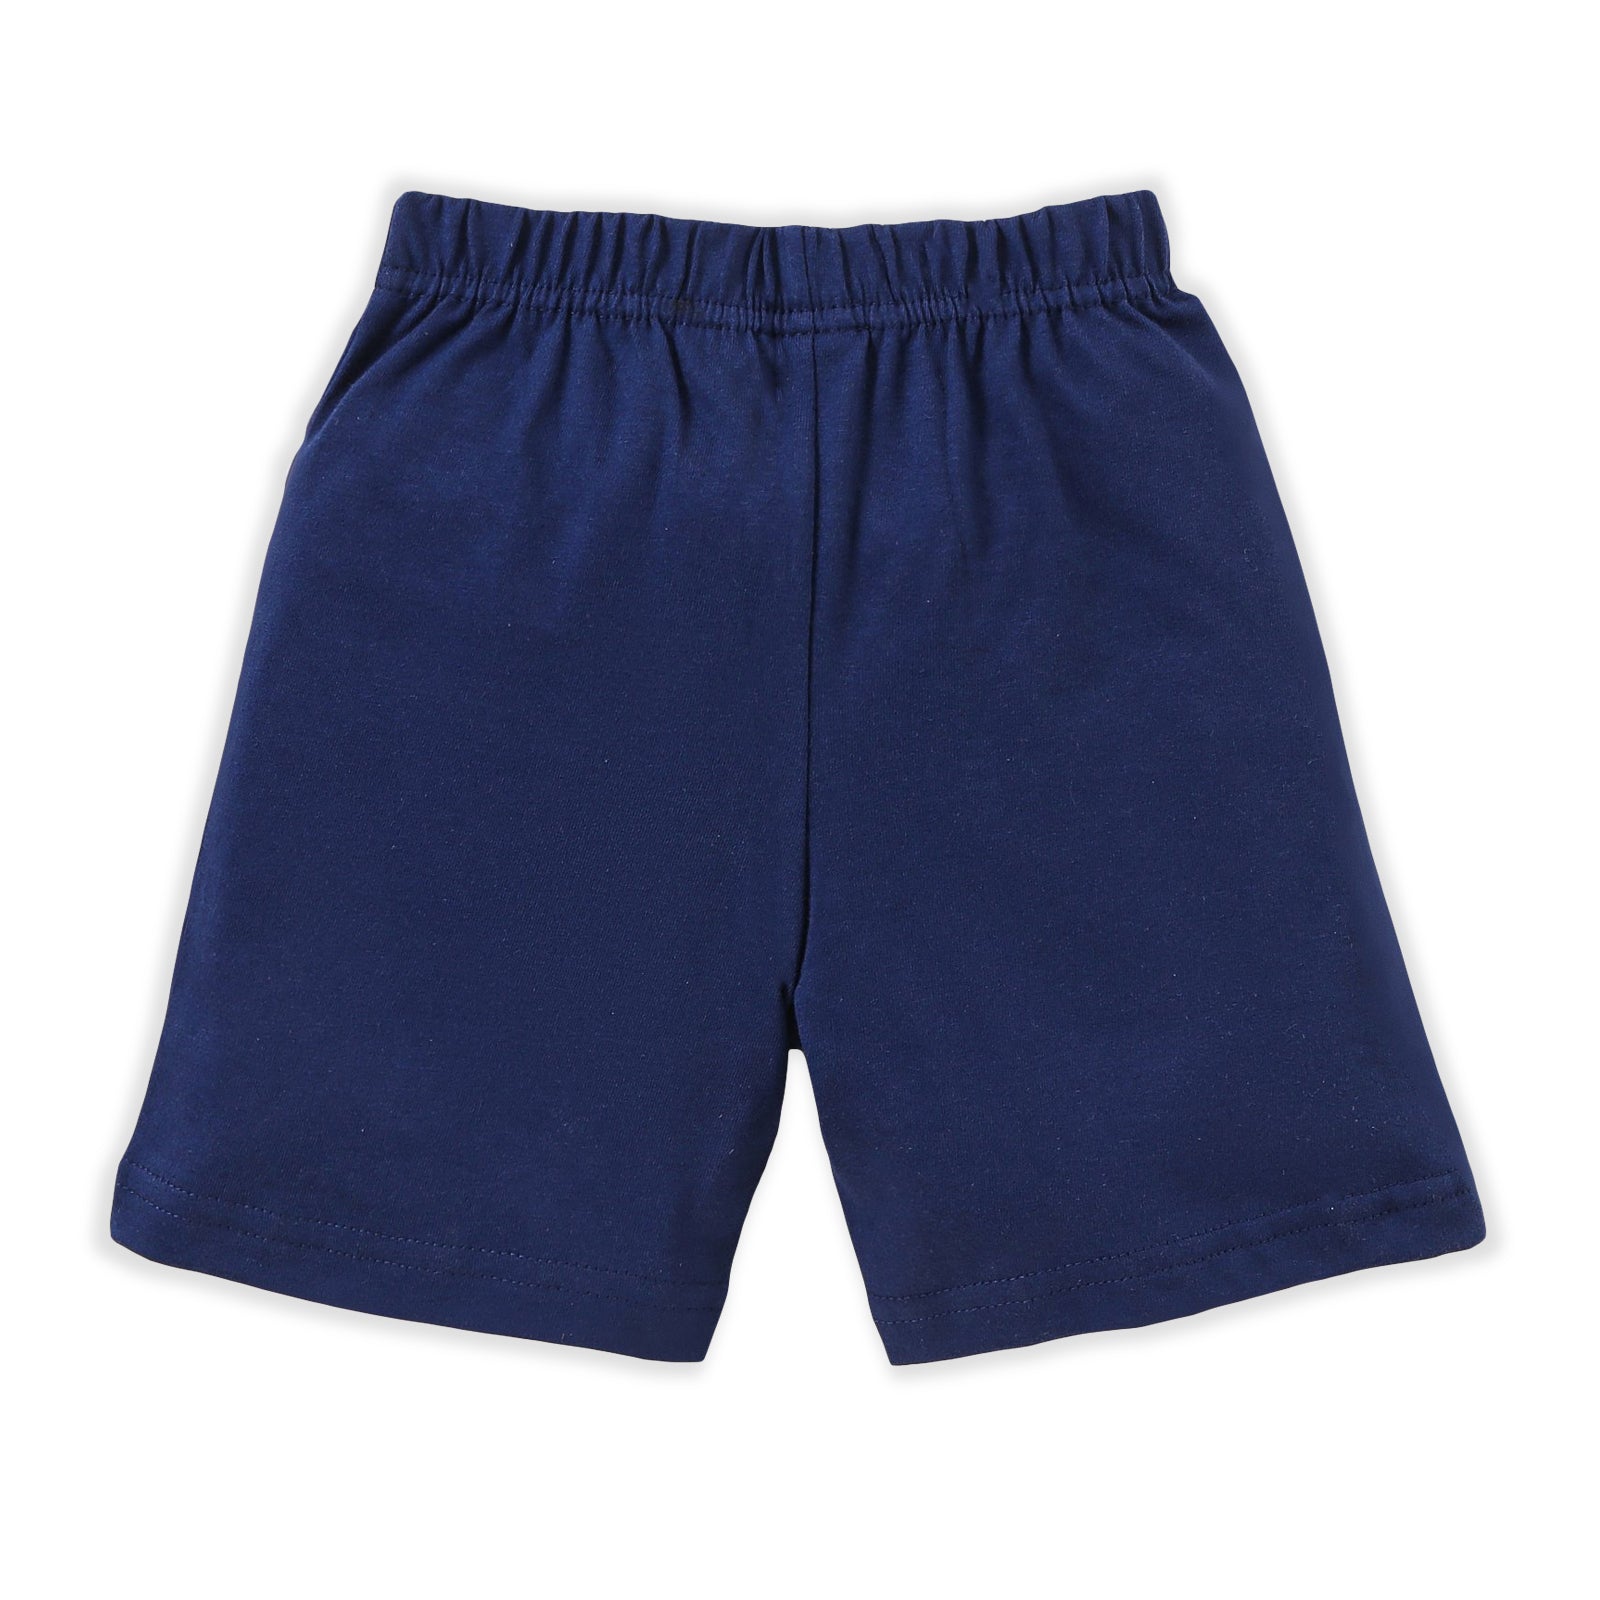 Kids Navy Solid Cotton Shorts